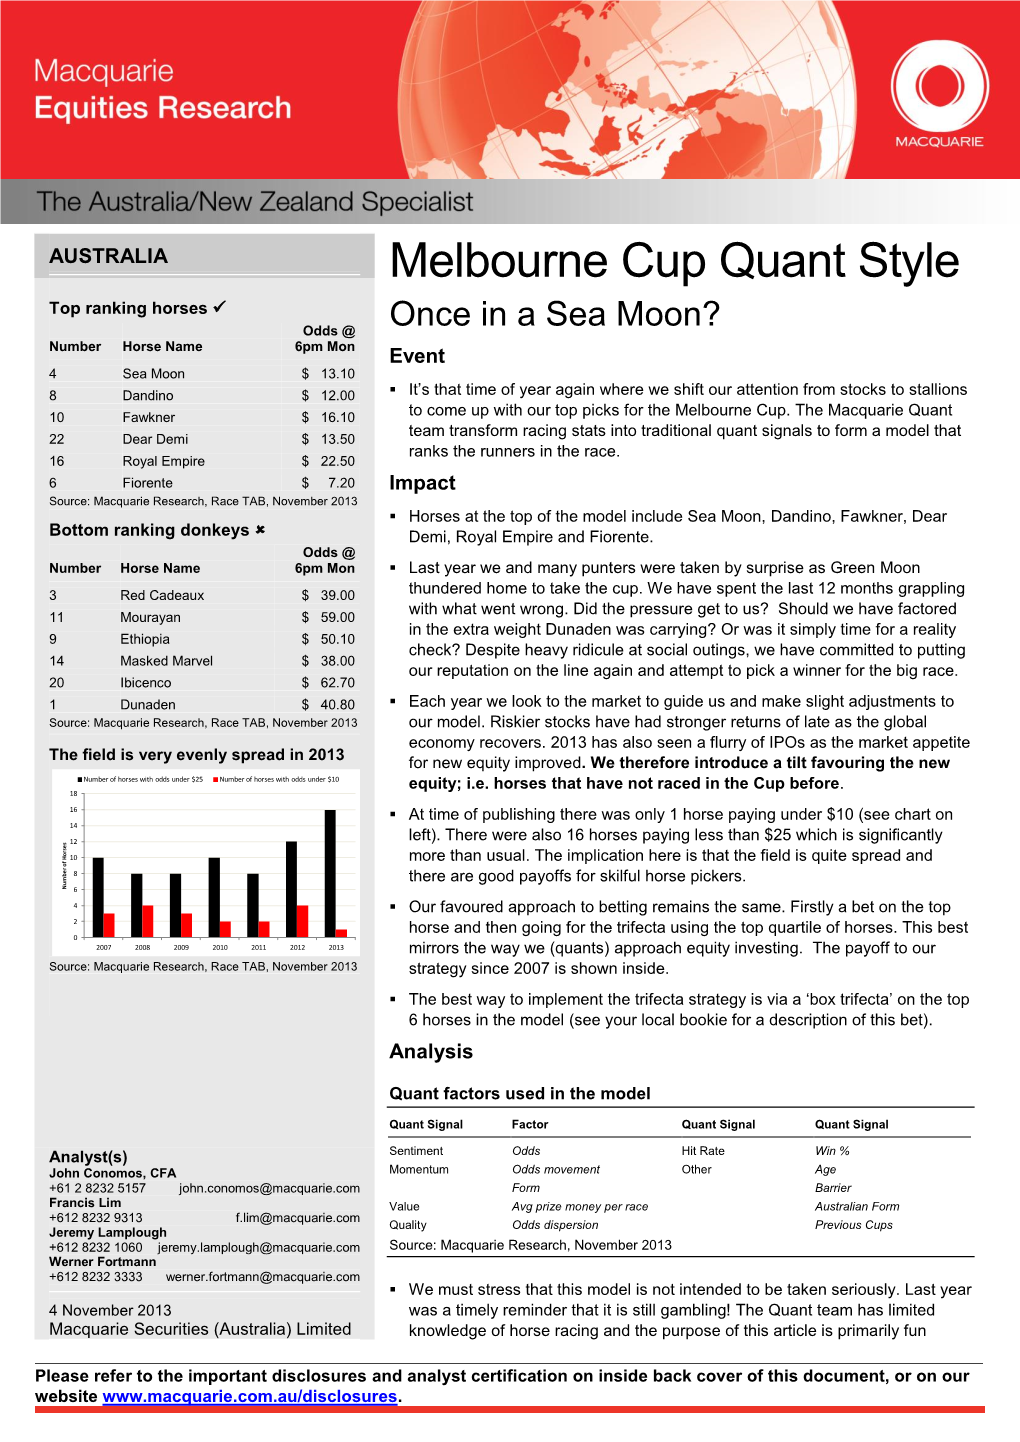 Melbourne Cup Quant Style